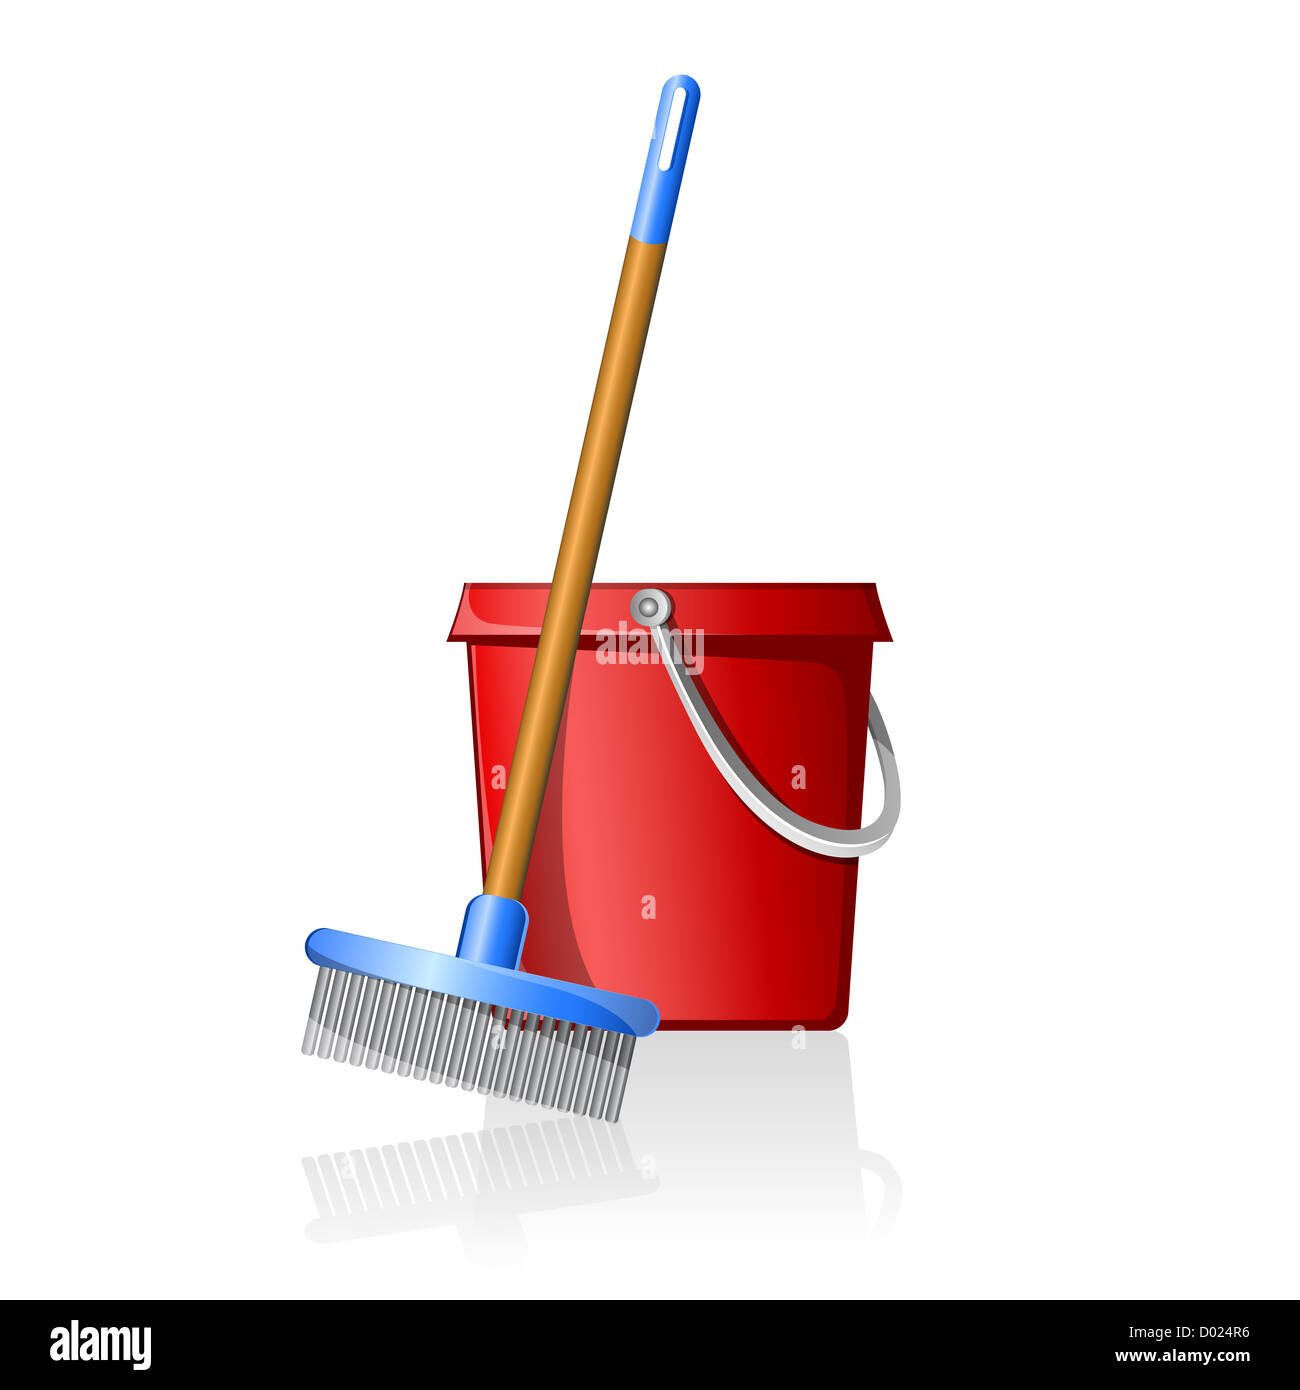 https://c8.alamy.com/comp/D024R6/illustration-of-bucket-with-broom-on-white-background-D024R6.jpg